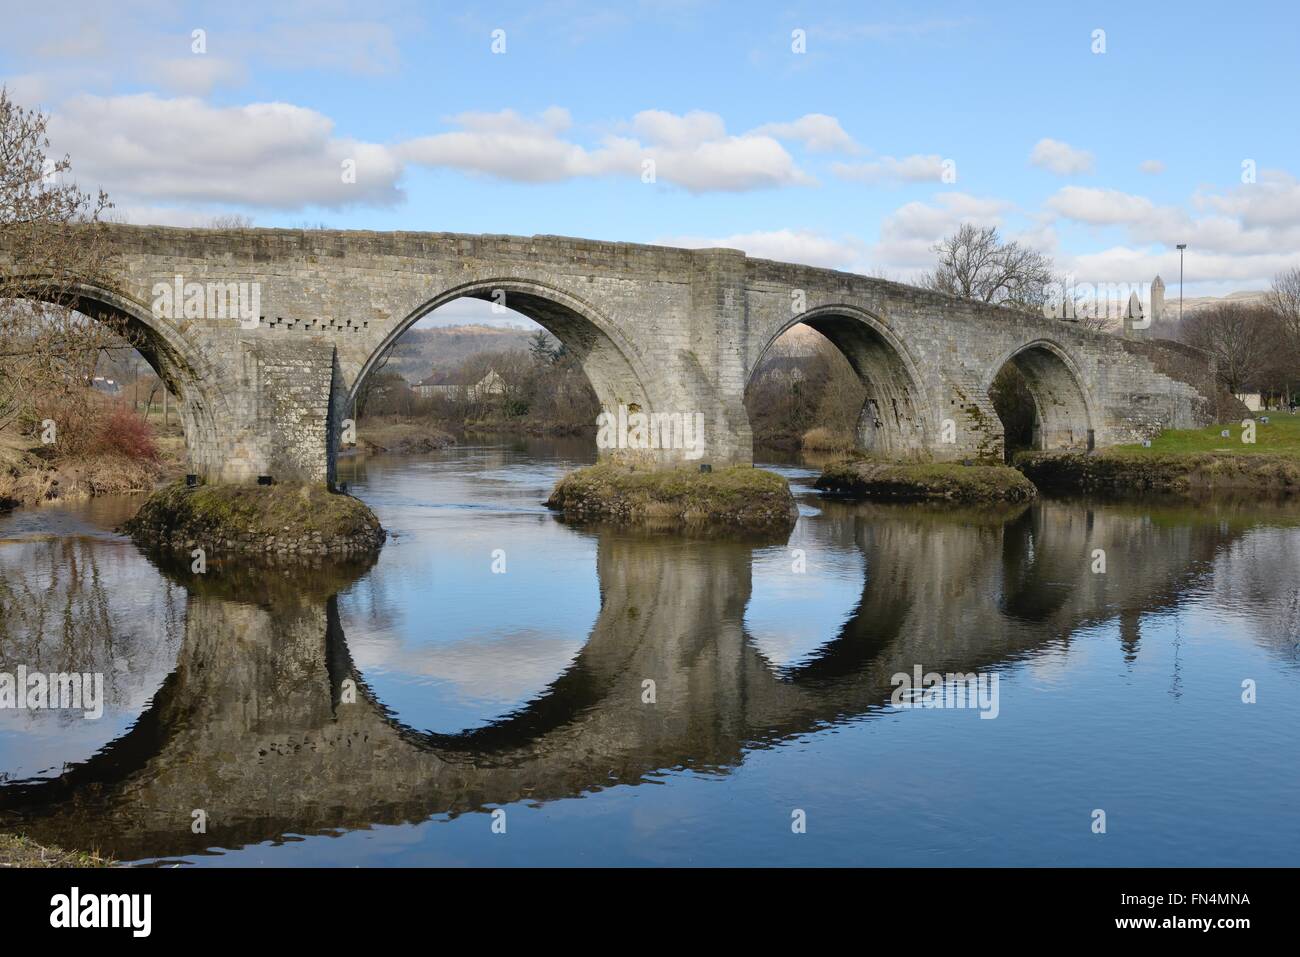 Stirling 'Old' Bridge crossing the river Forth in Scotland, UK, where the Battle of Stirling bridge took place. Stock Photo